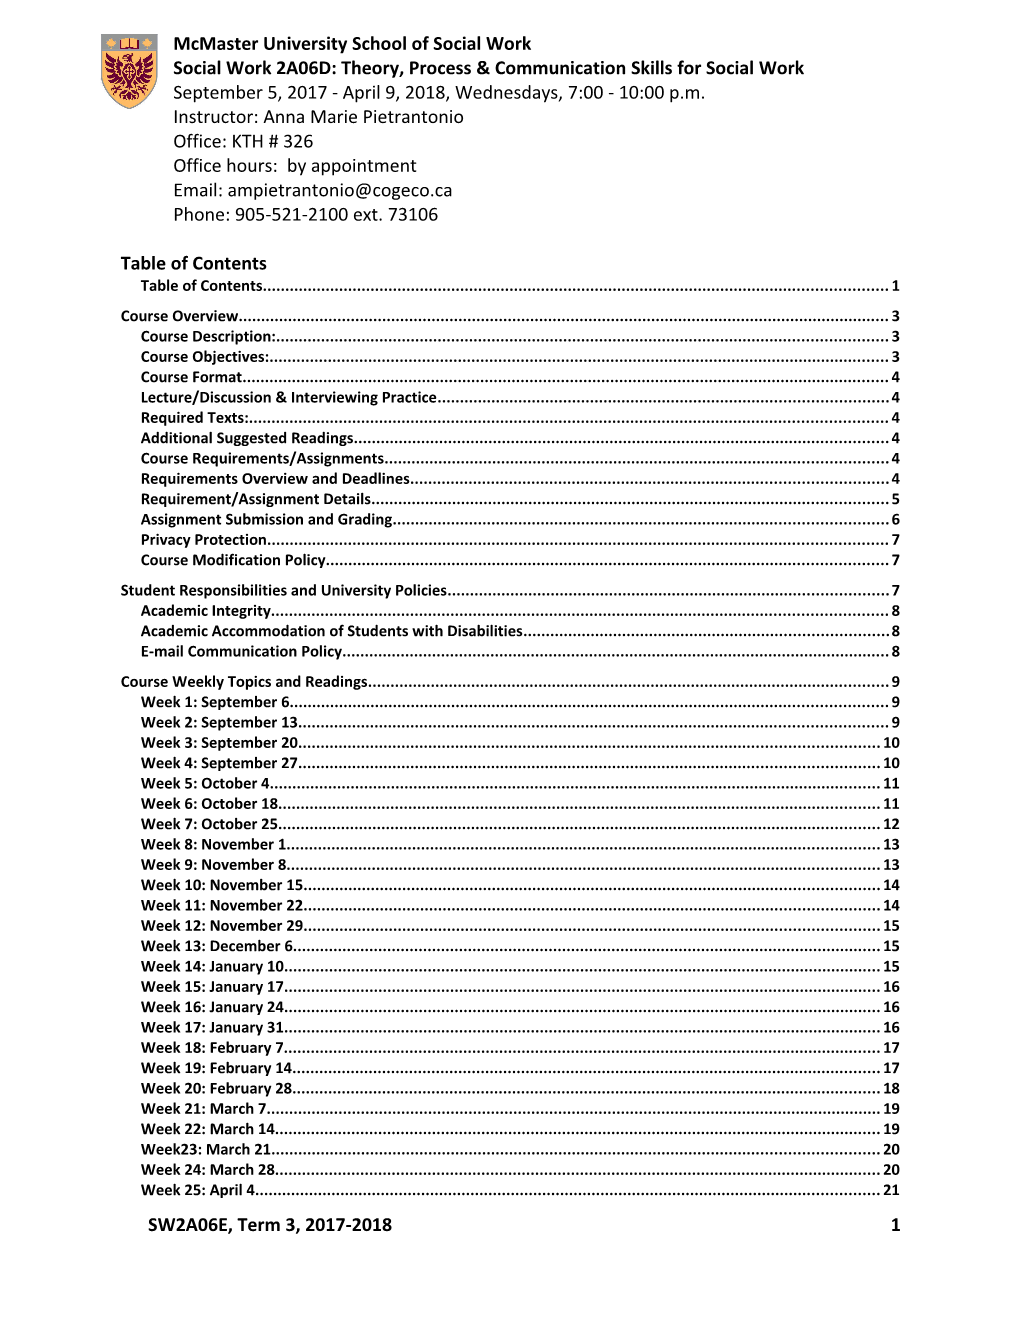 Accessible Course Outline Template s1